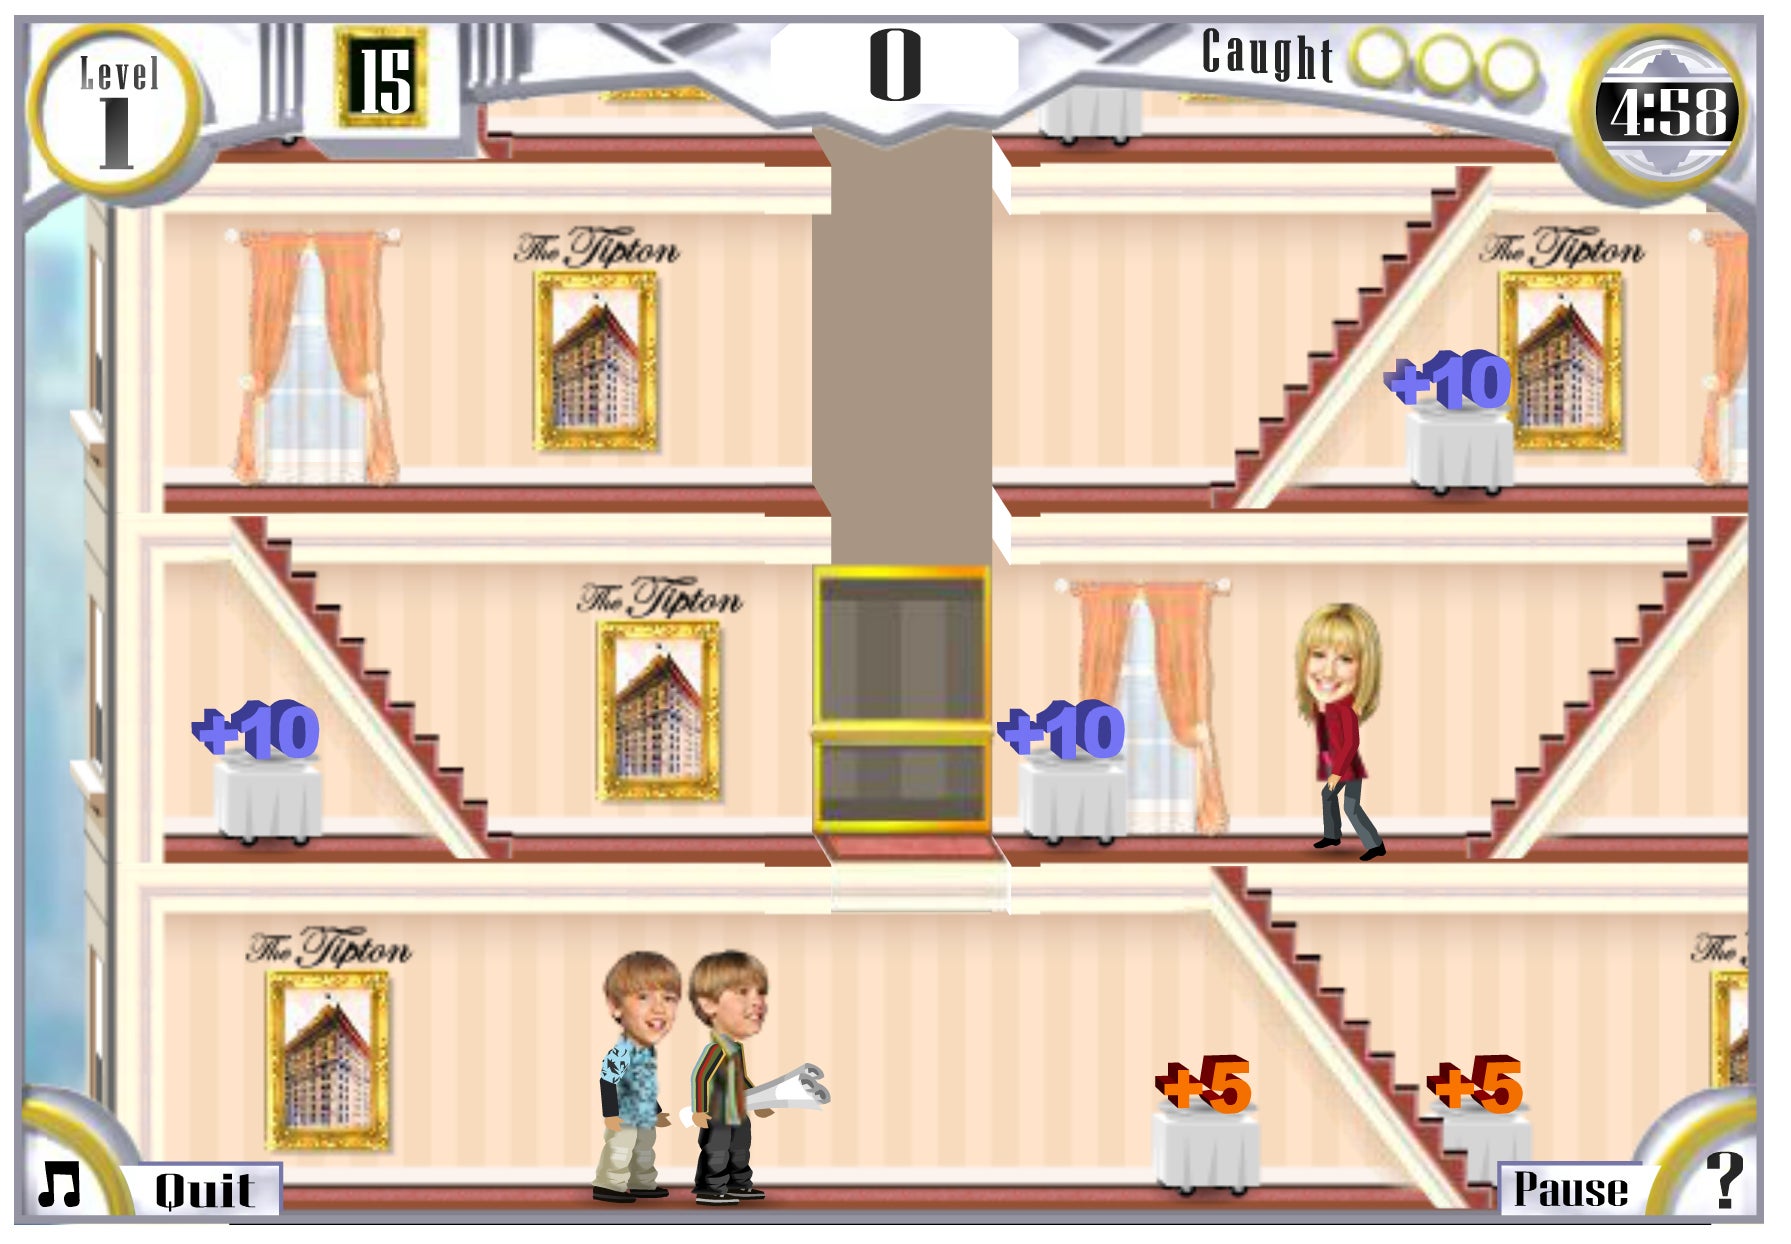 shopping mall games online